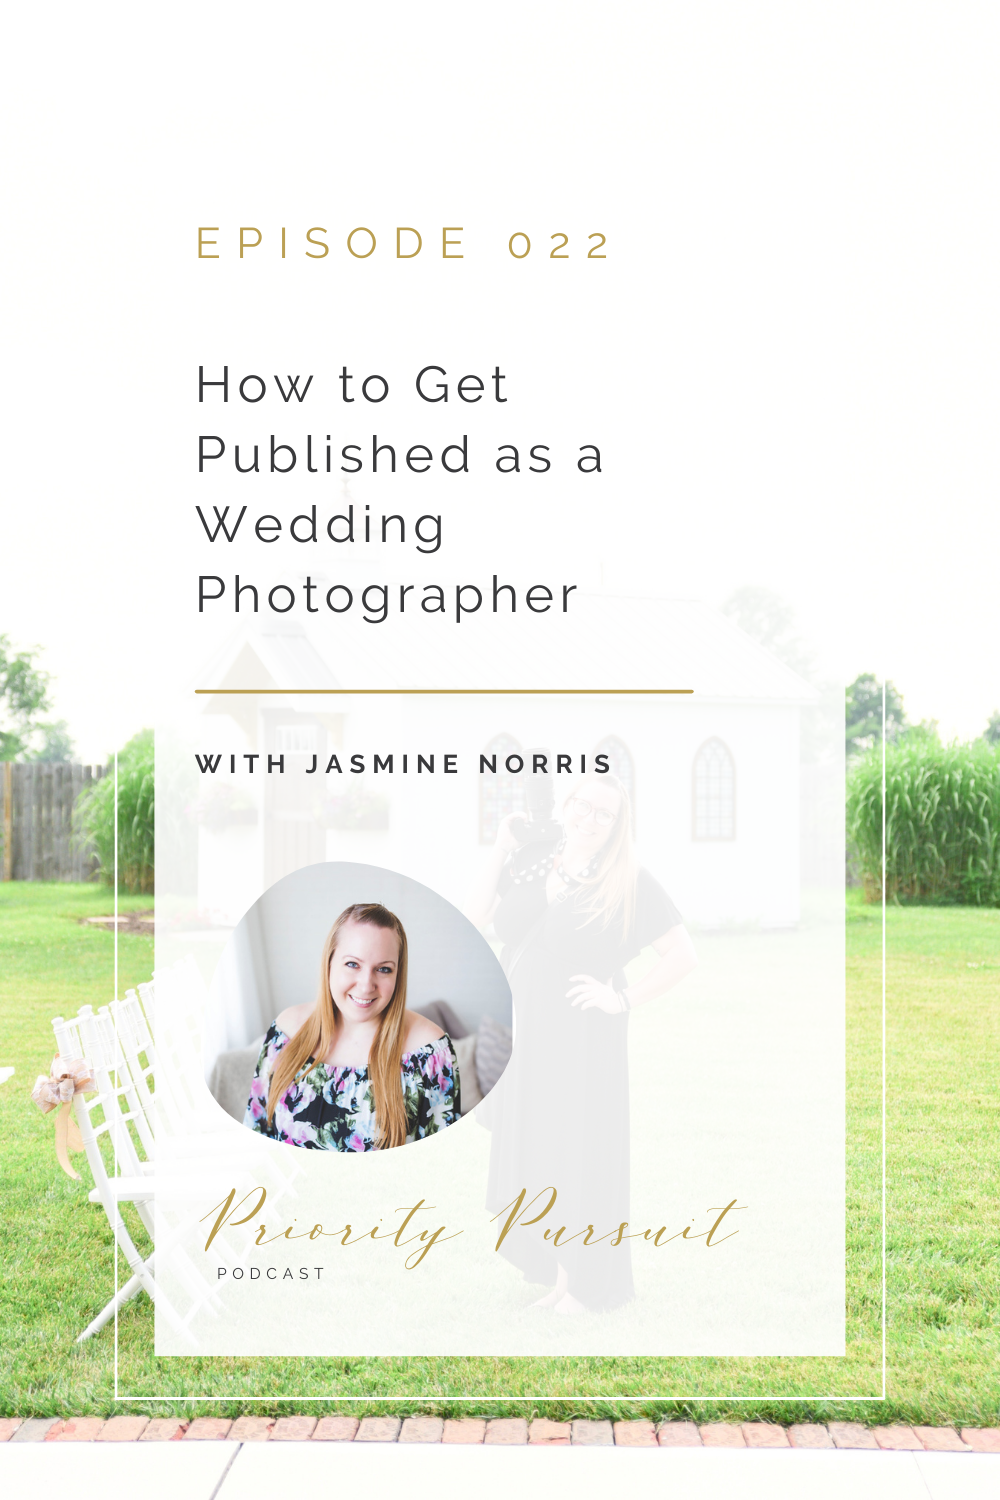 Victoria Rayburn and Jasmine Norries discuss how to get published as a wedding photographer on this episode of “Priority Pursuit.”